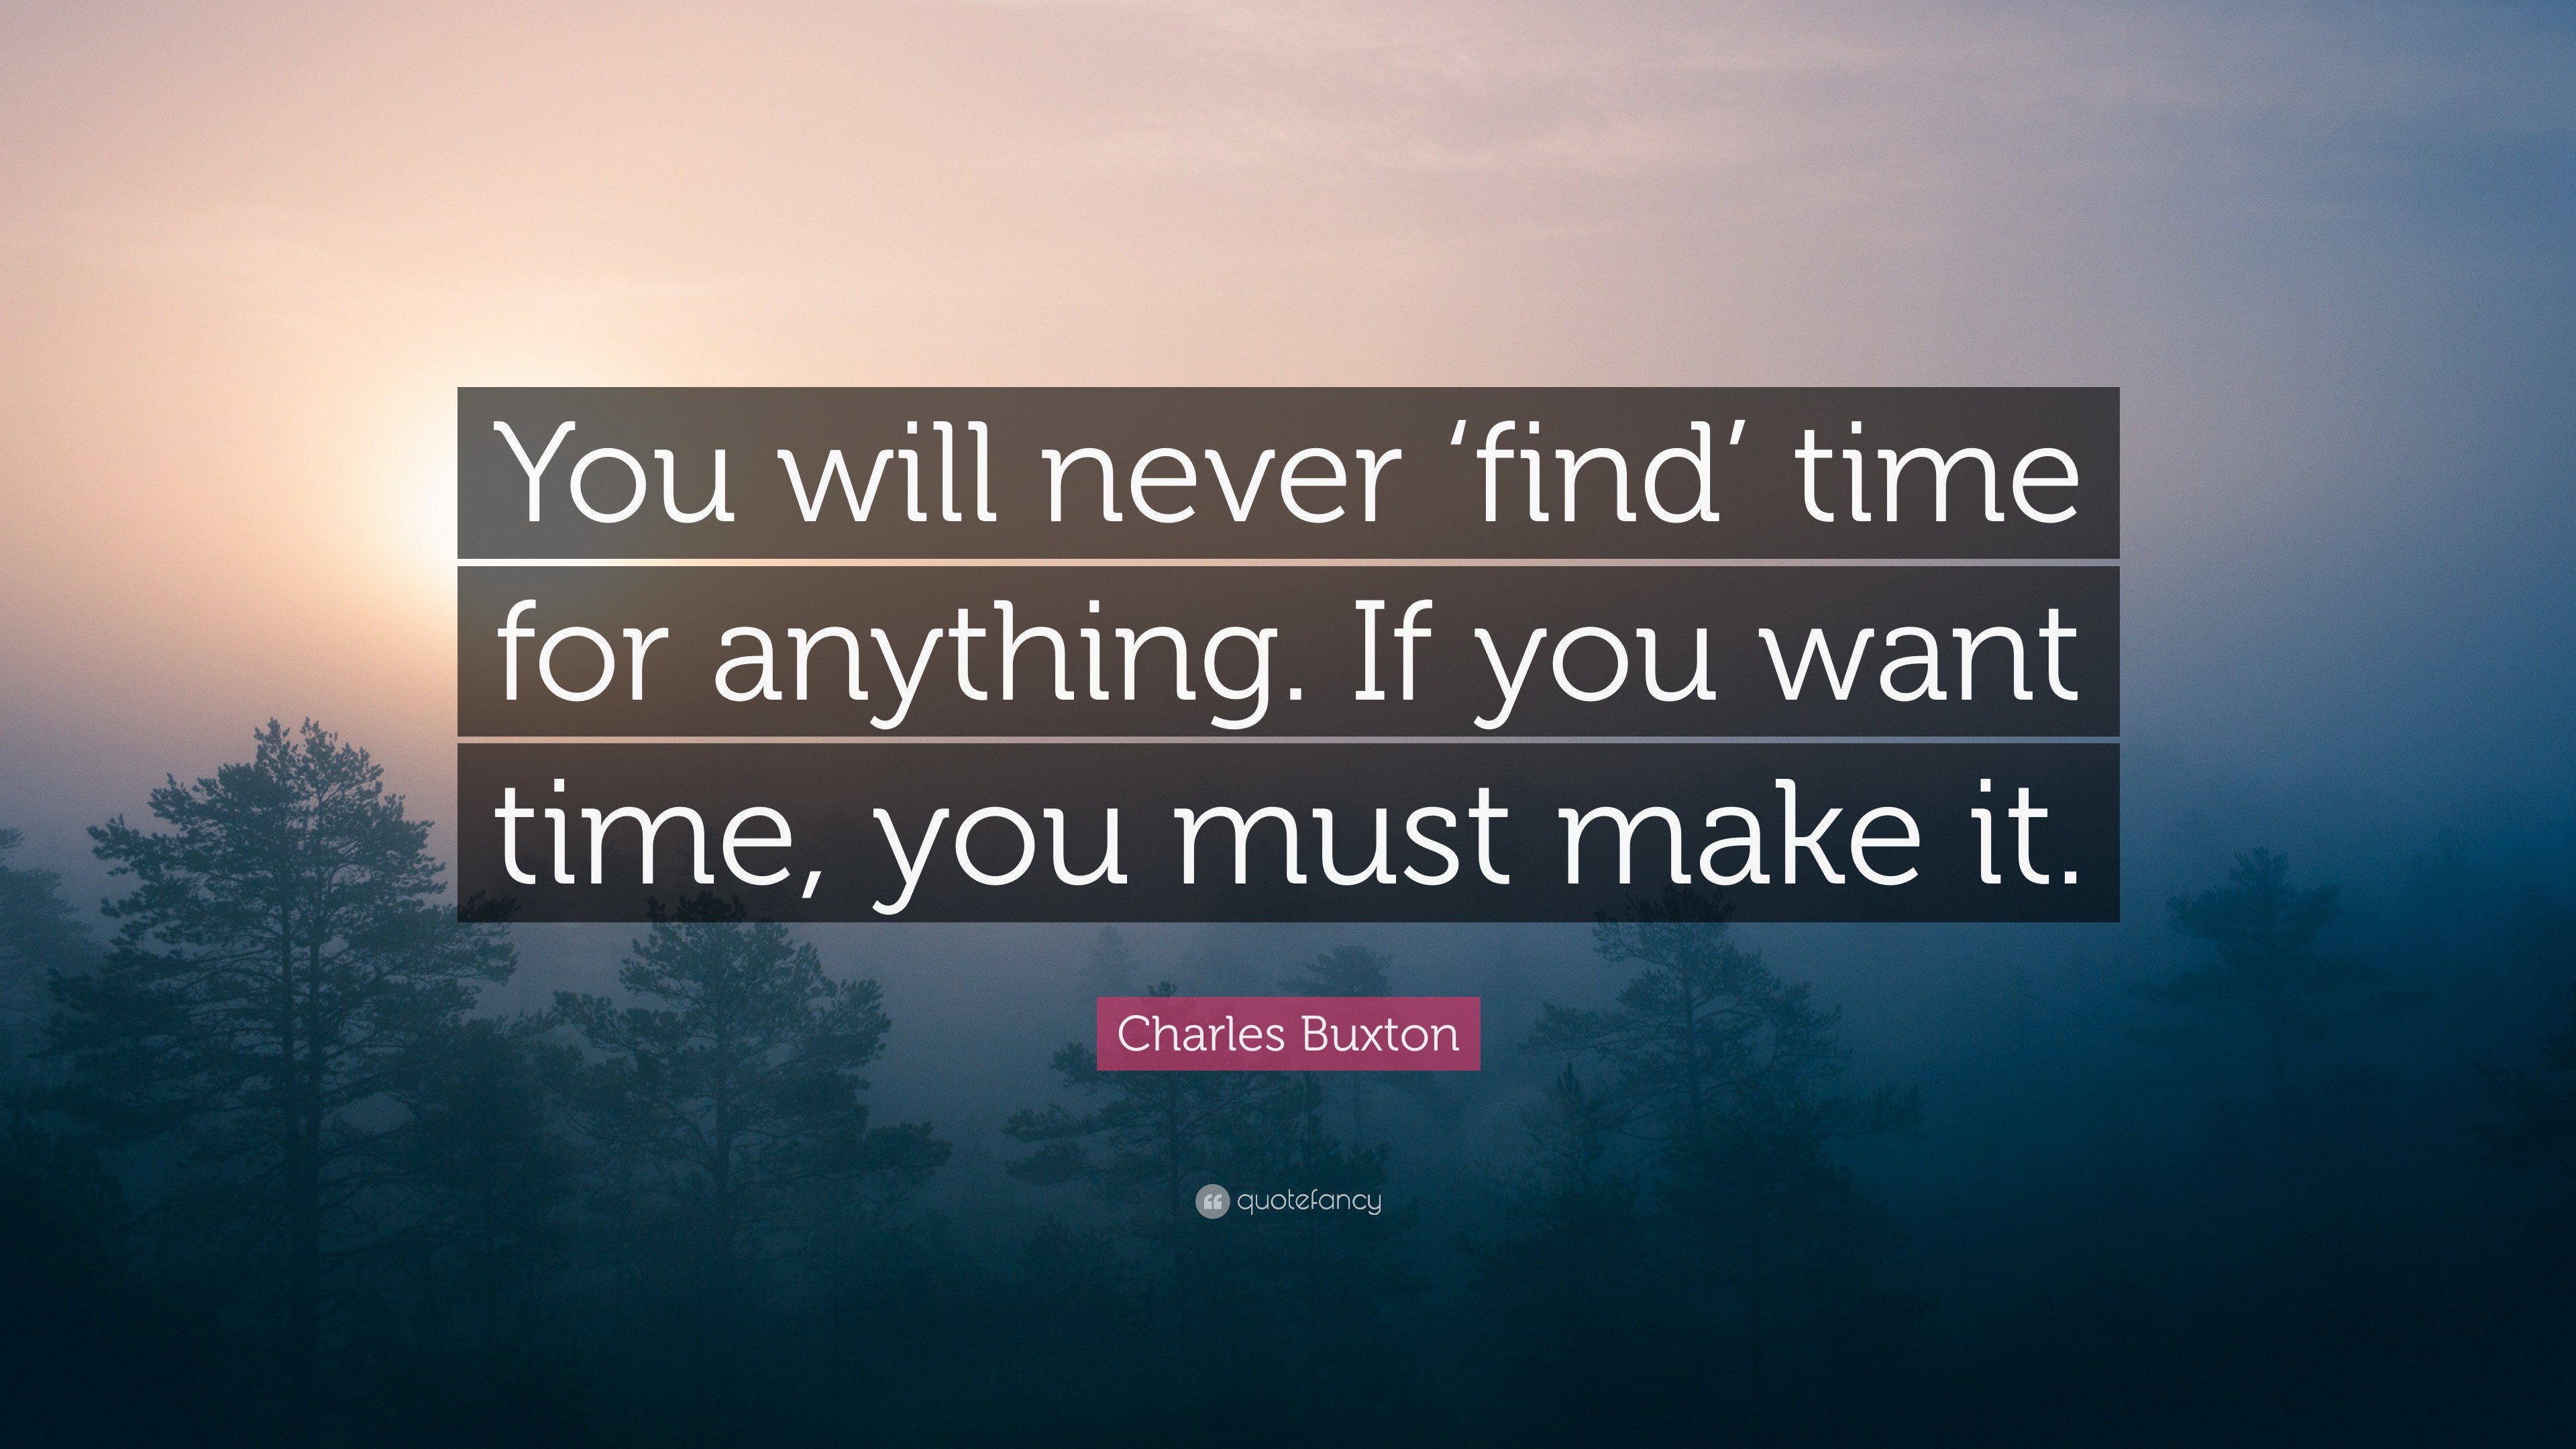 Charles Buxton Quote: “You will never ‘find’ time for anything. If you ...